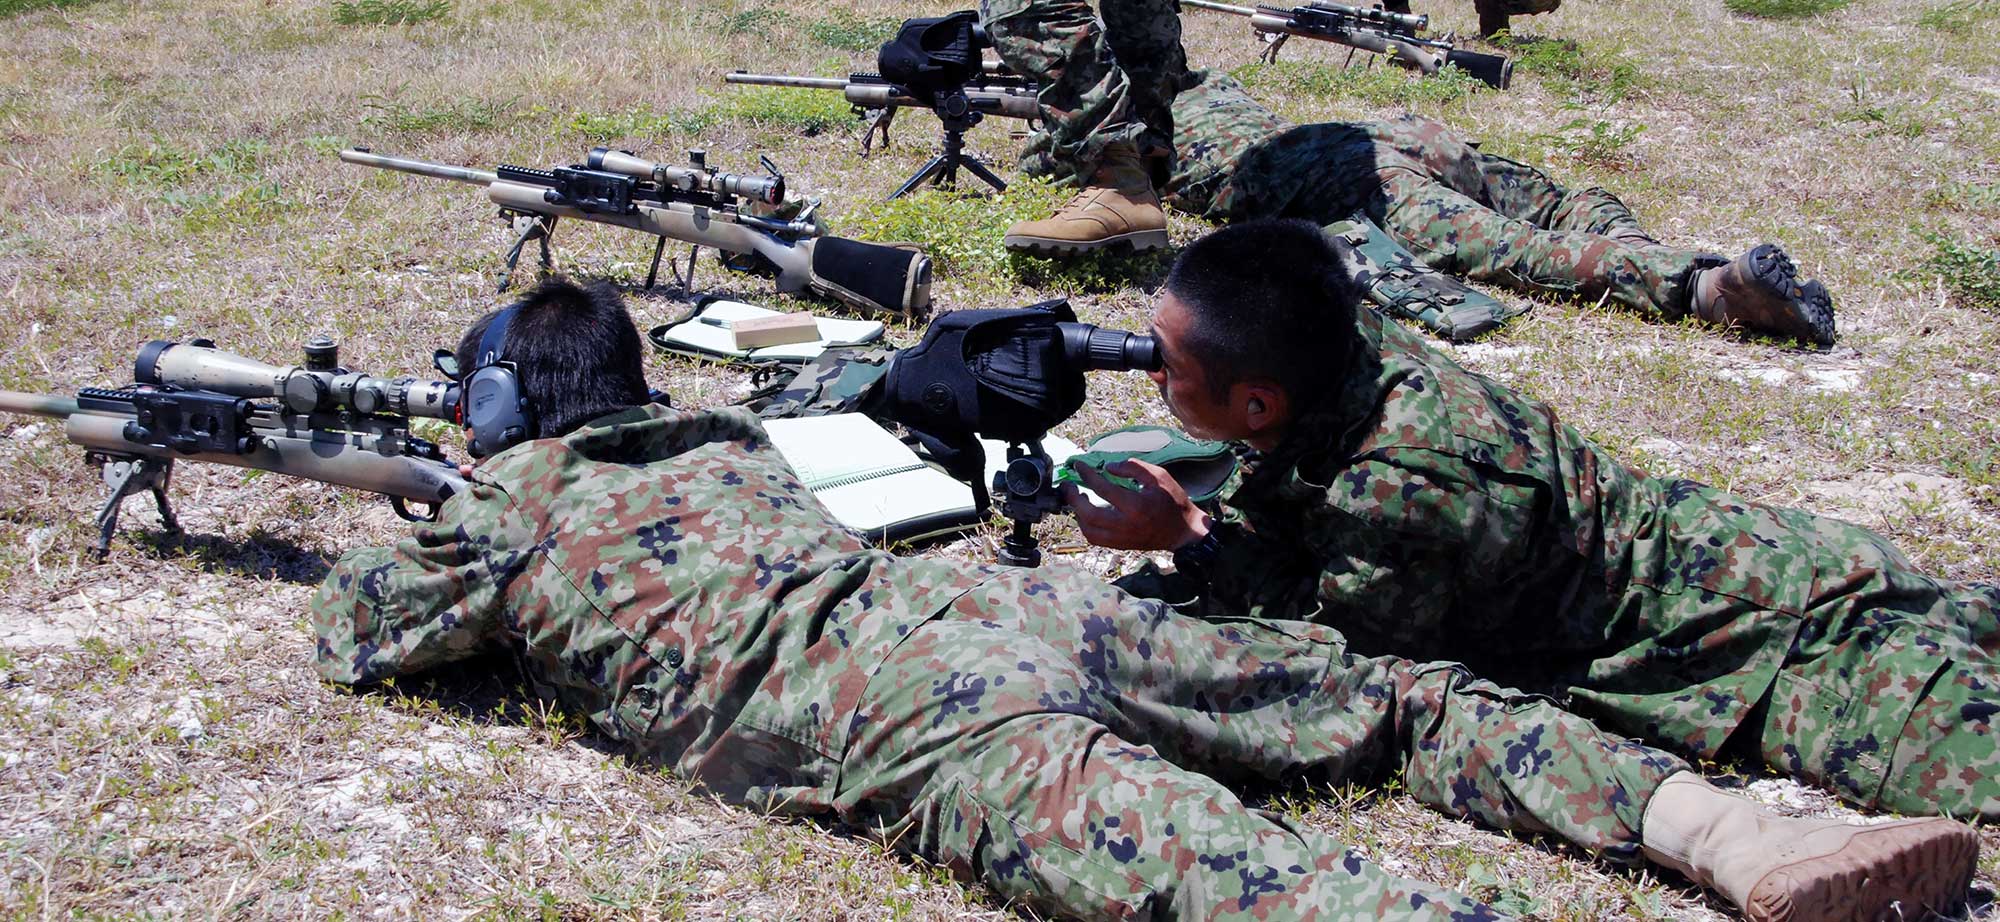 The ODA instructed the SFGp in sniper techniques. Here, a Japanese shooter uses the M24 Sniper Weapons System while another calls out hits with a spotting scope.